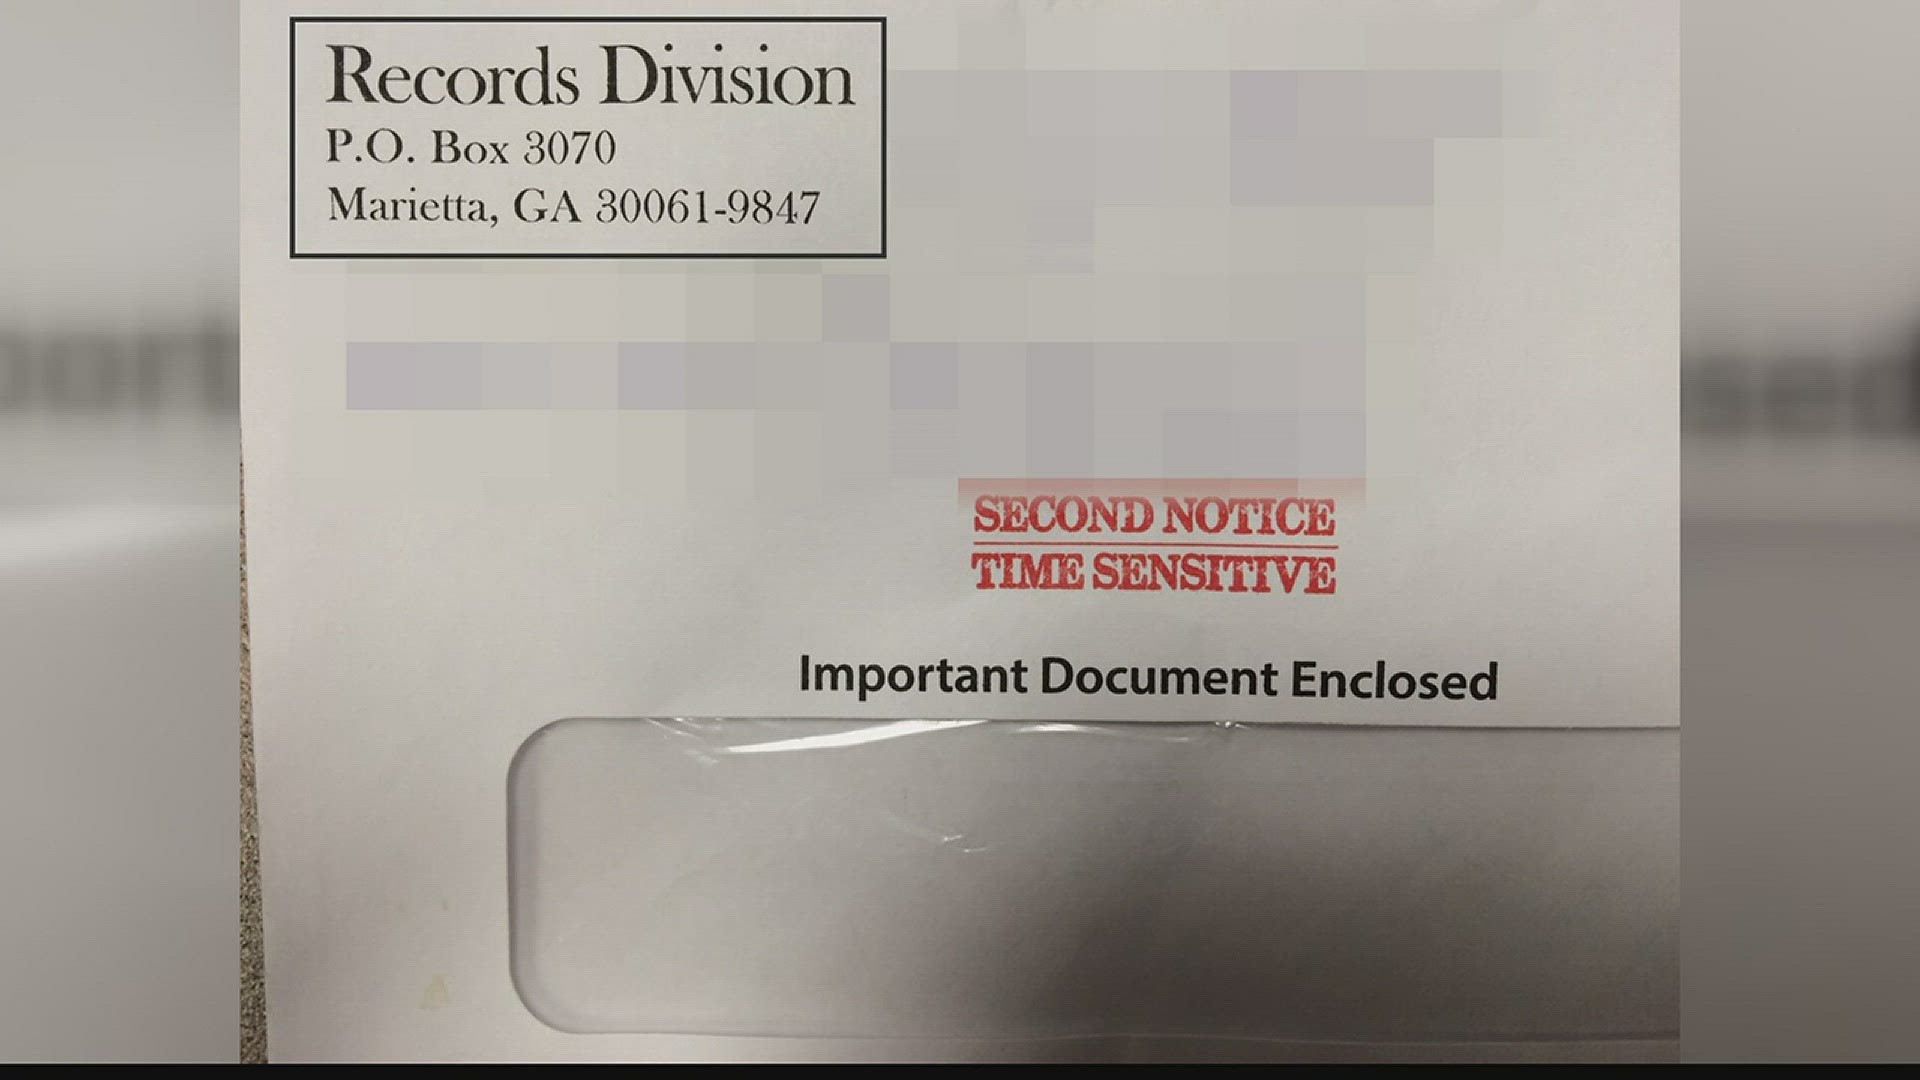 Is This Final Expense Mailer A Scheme?